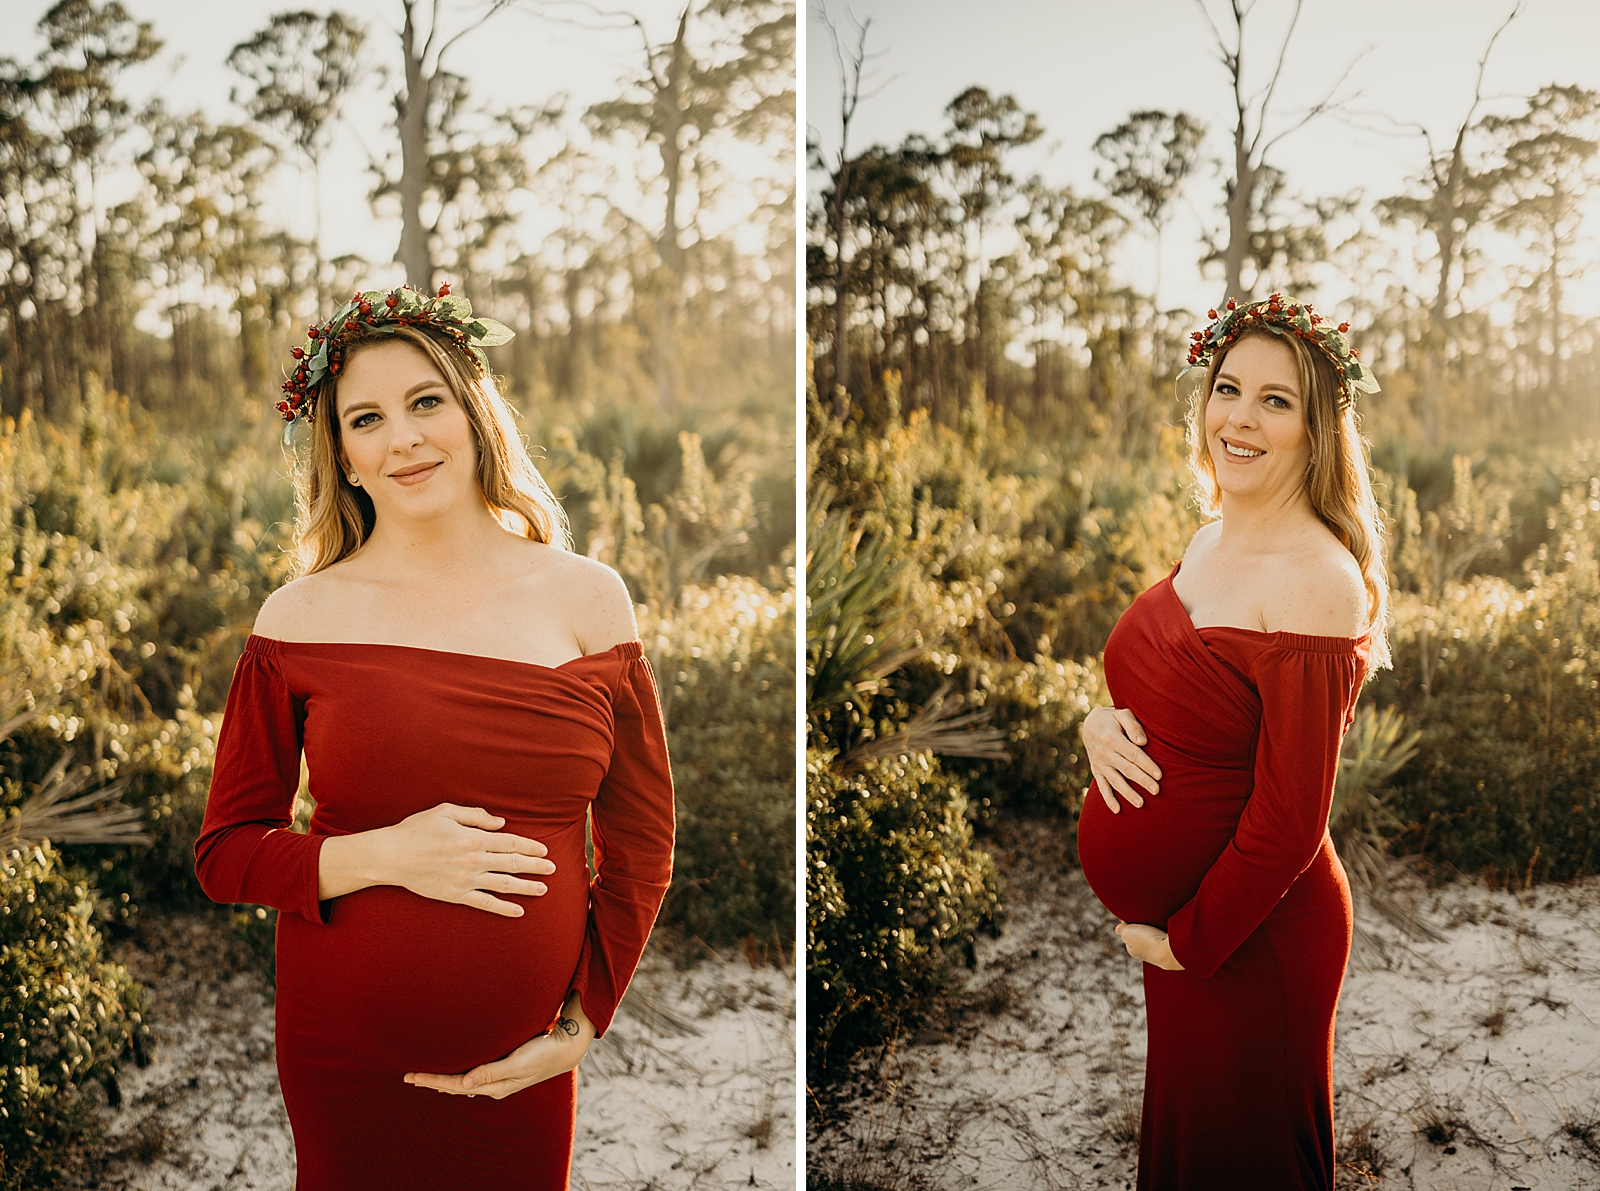 Pregnant soon to be mother holding her baby bump Johnathan Dickinson Park Maternity Photography captured by South Florida Family Photographer Maggie Alvarez Photography